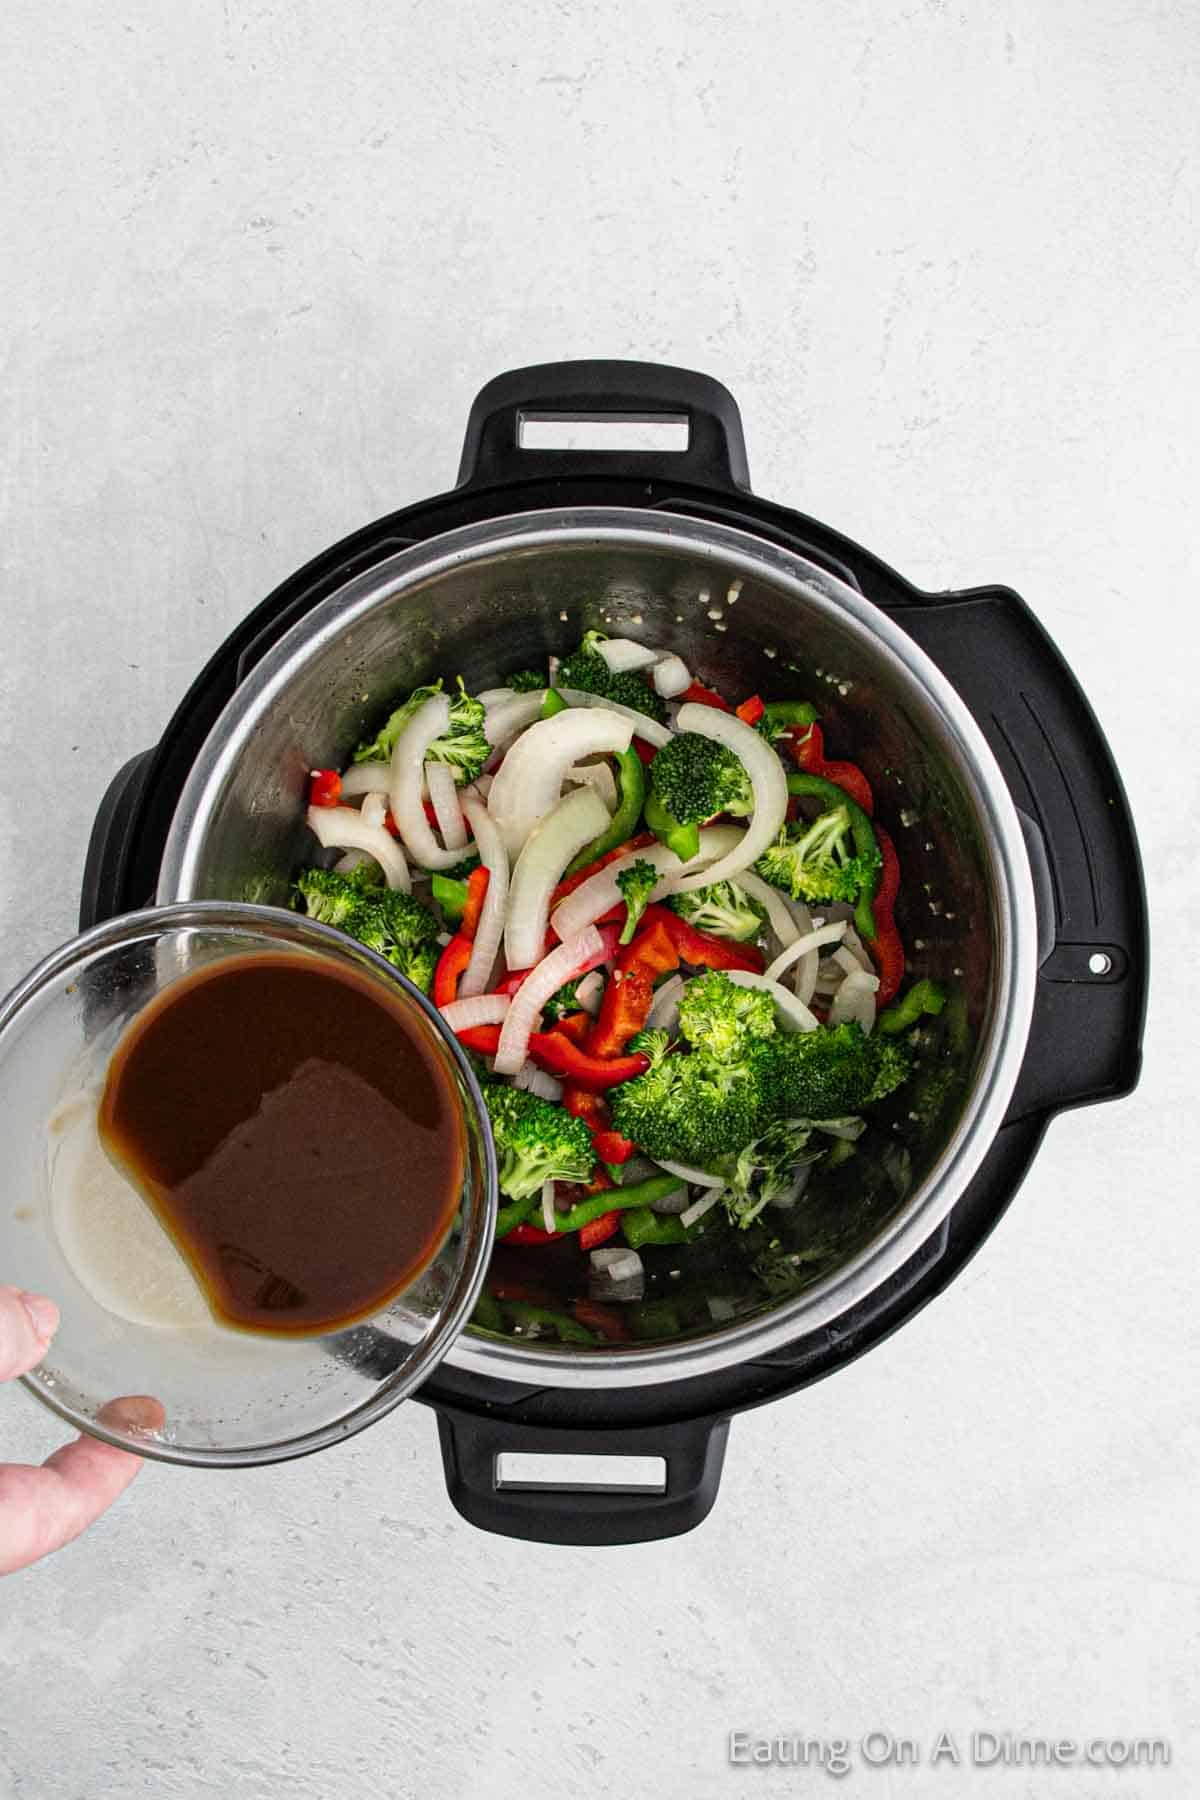 Pouring in the soy sauce mixture in the instant pot with vegetables